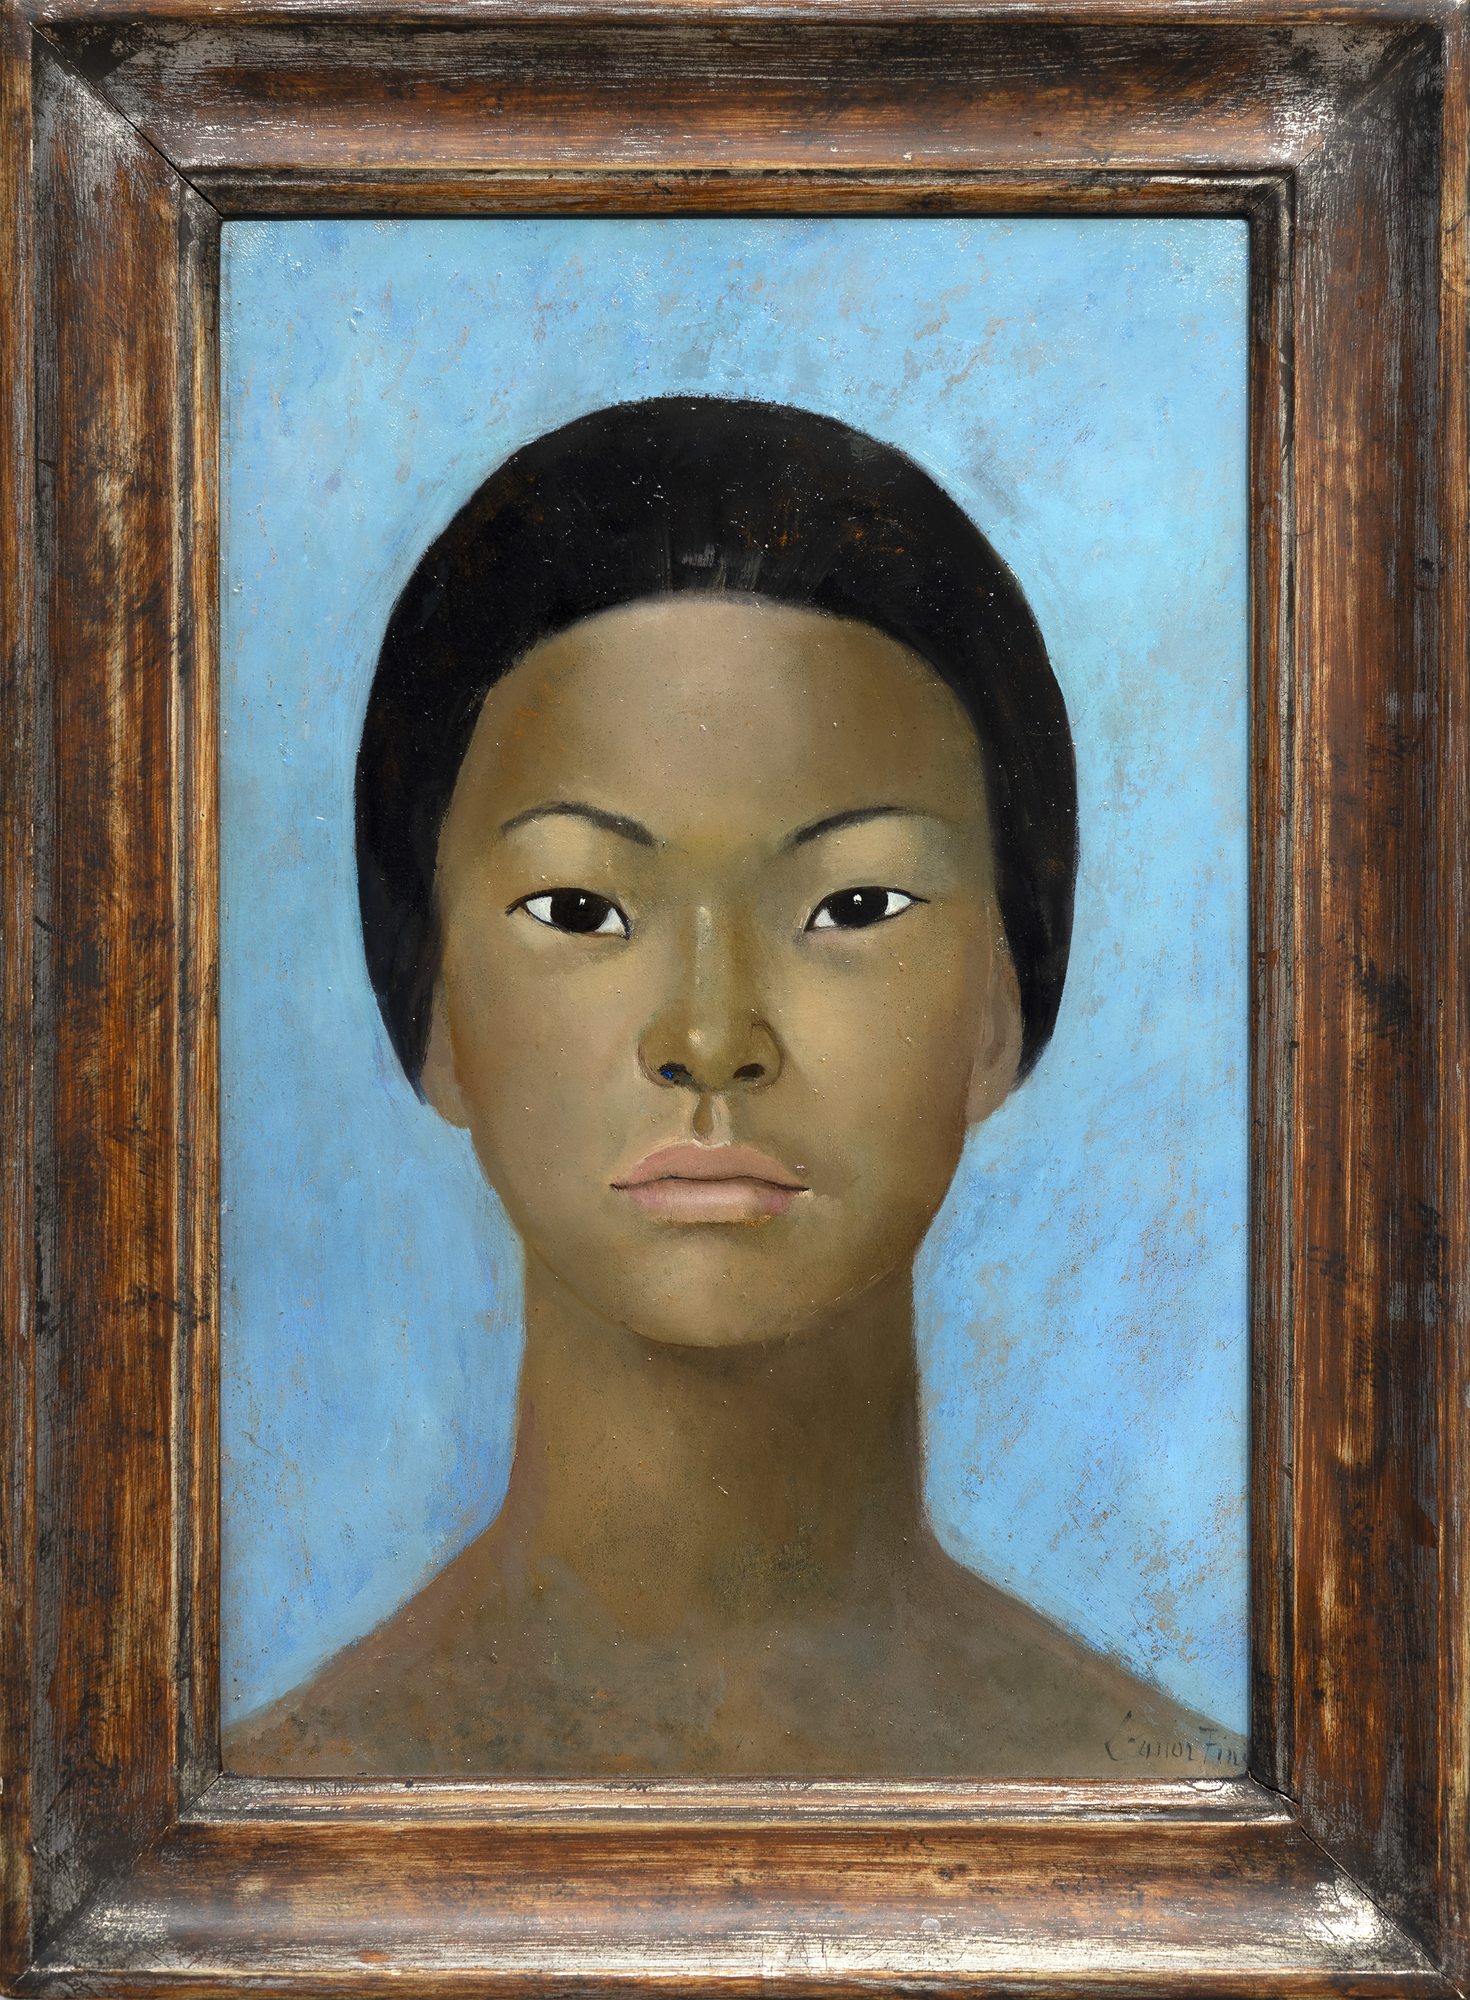 LEONOR FINI - Portrait of Pao Ying - oil on panel - 15 1/2 x 10 1/4 in.